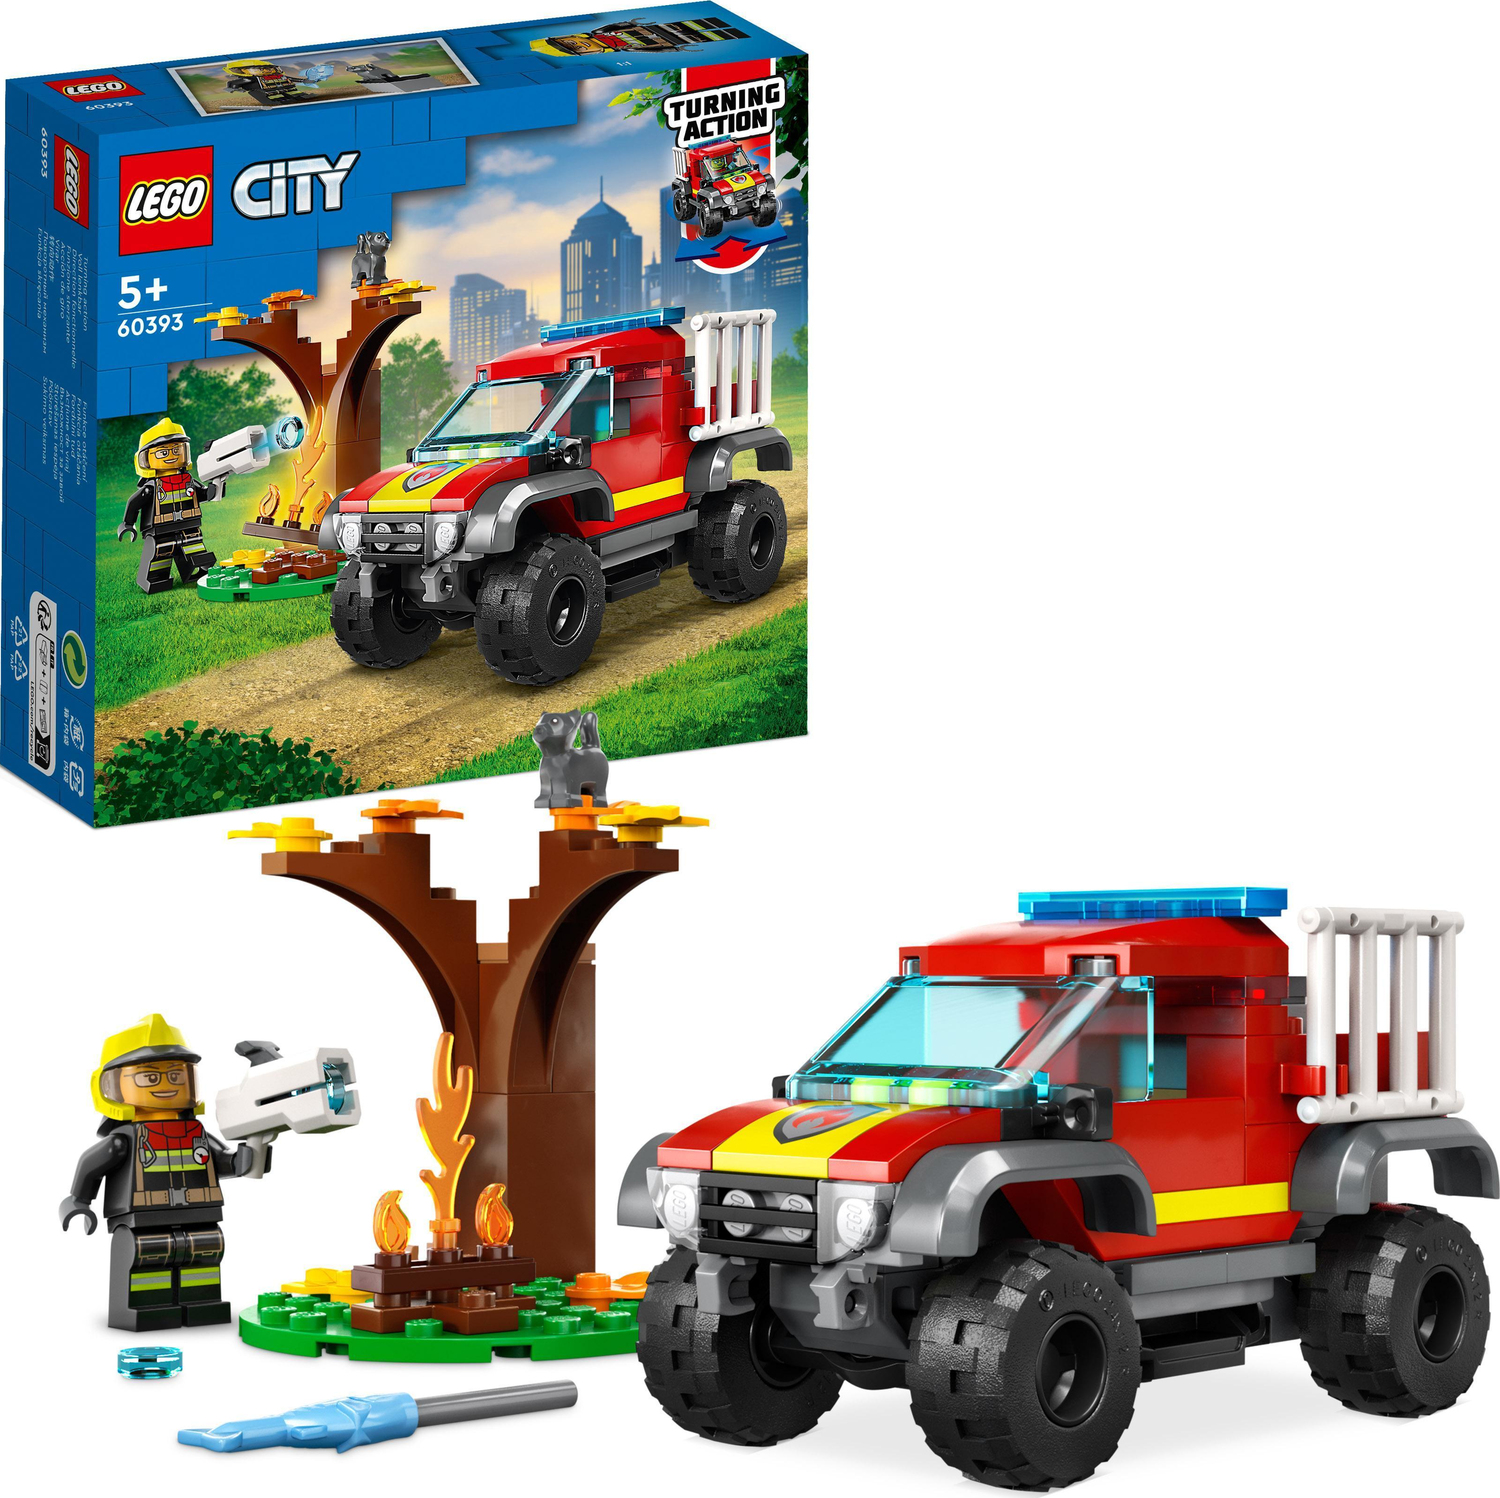 LEGO® City: 4x4 Fire Truck Rescue - The Toy Box Hanover